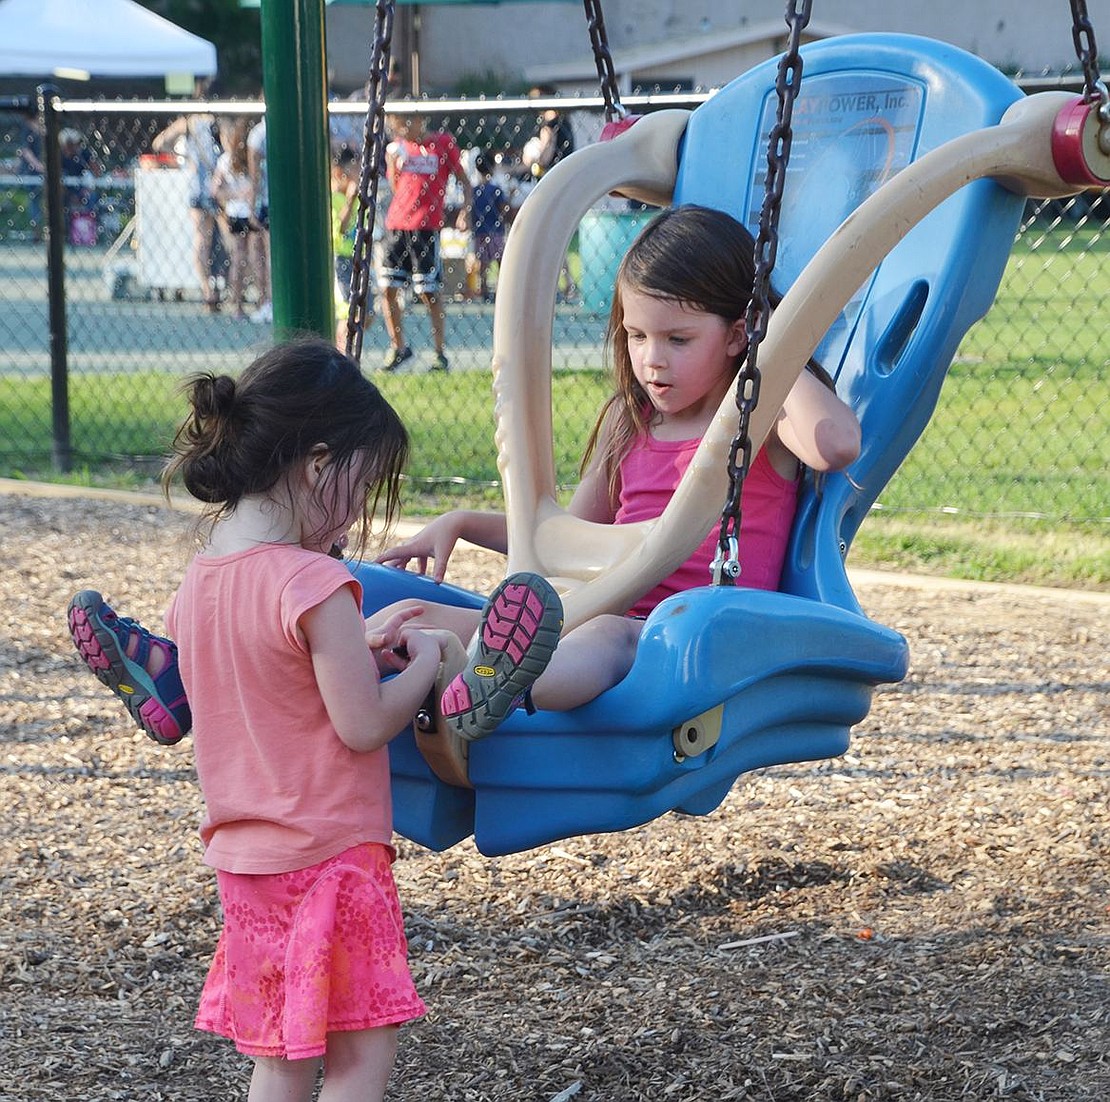 <p class="MsoNormal">Rye Brook resident Caroline Shaver, 3, helps strap in her big sister Campbell Shaver, 6, into a swing.&nbsp;</p>